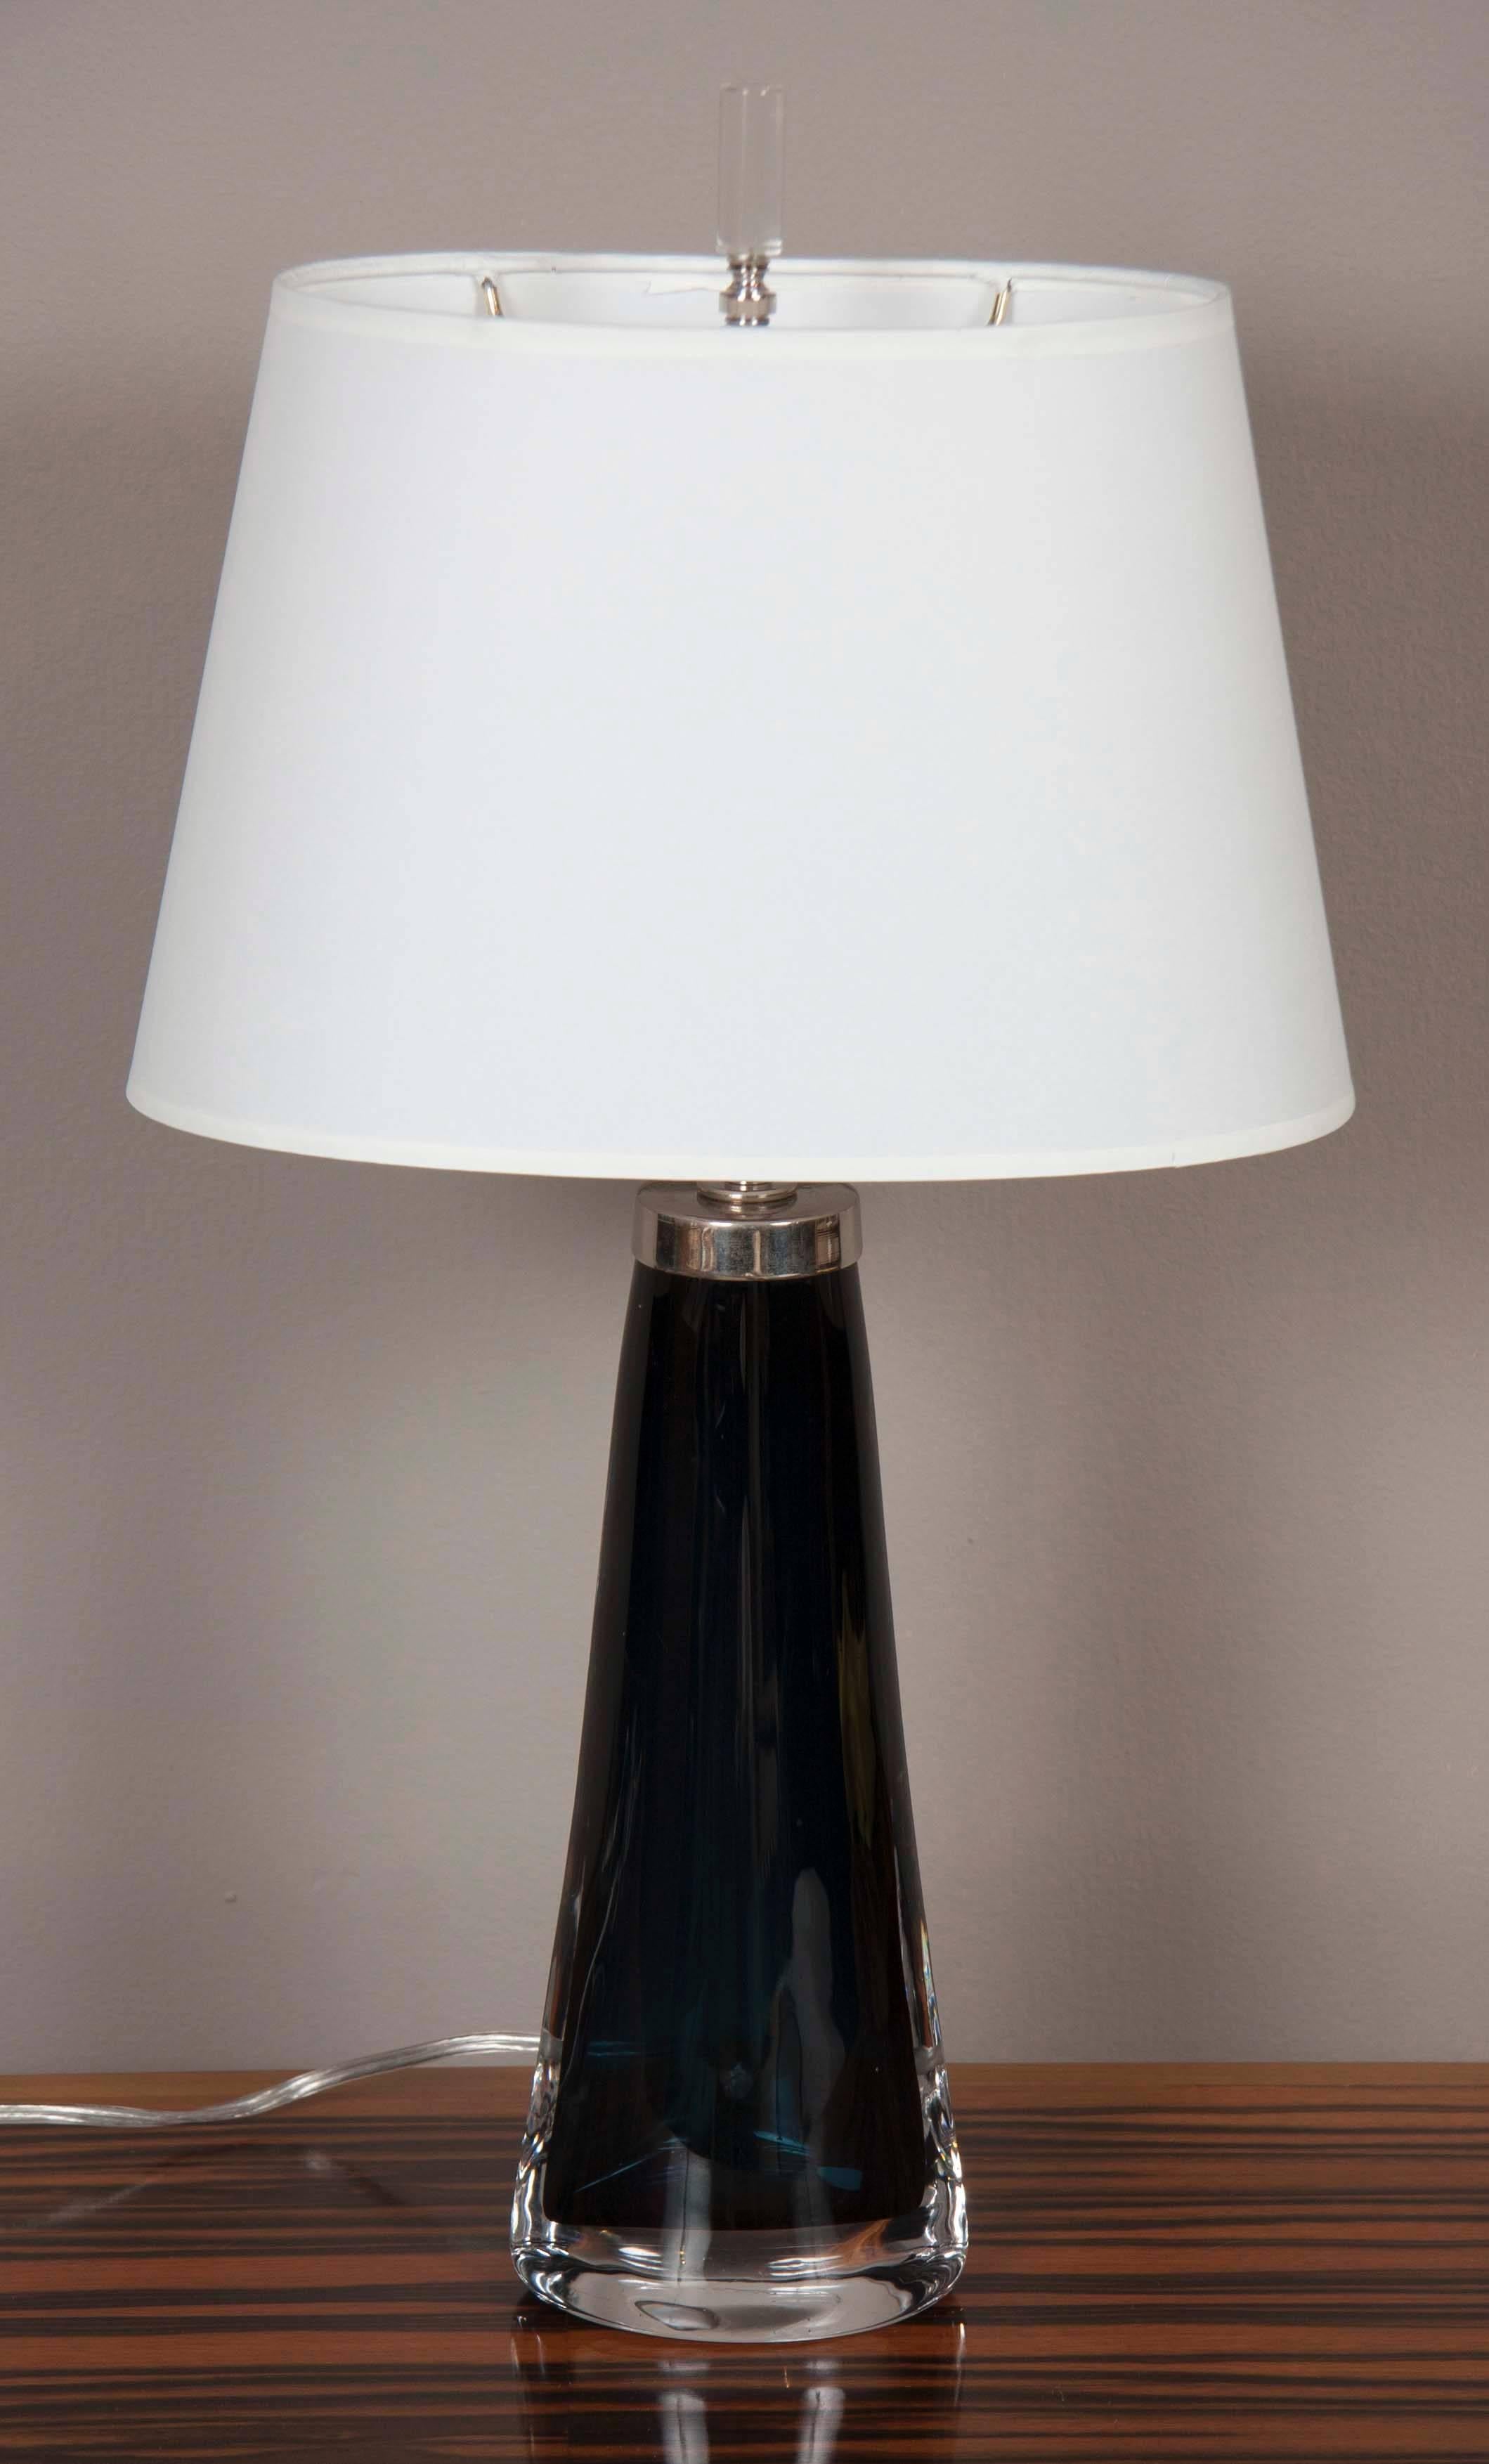 A beautiful glass table lamp by Nils Landberg for Orrefors having a dark blue interior and a clear exterior.